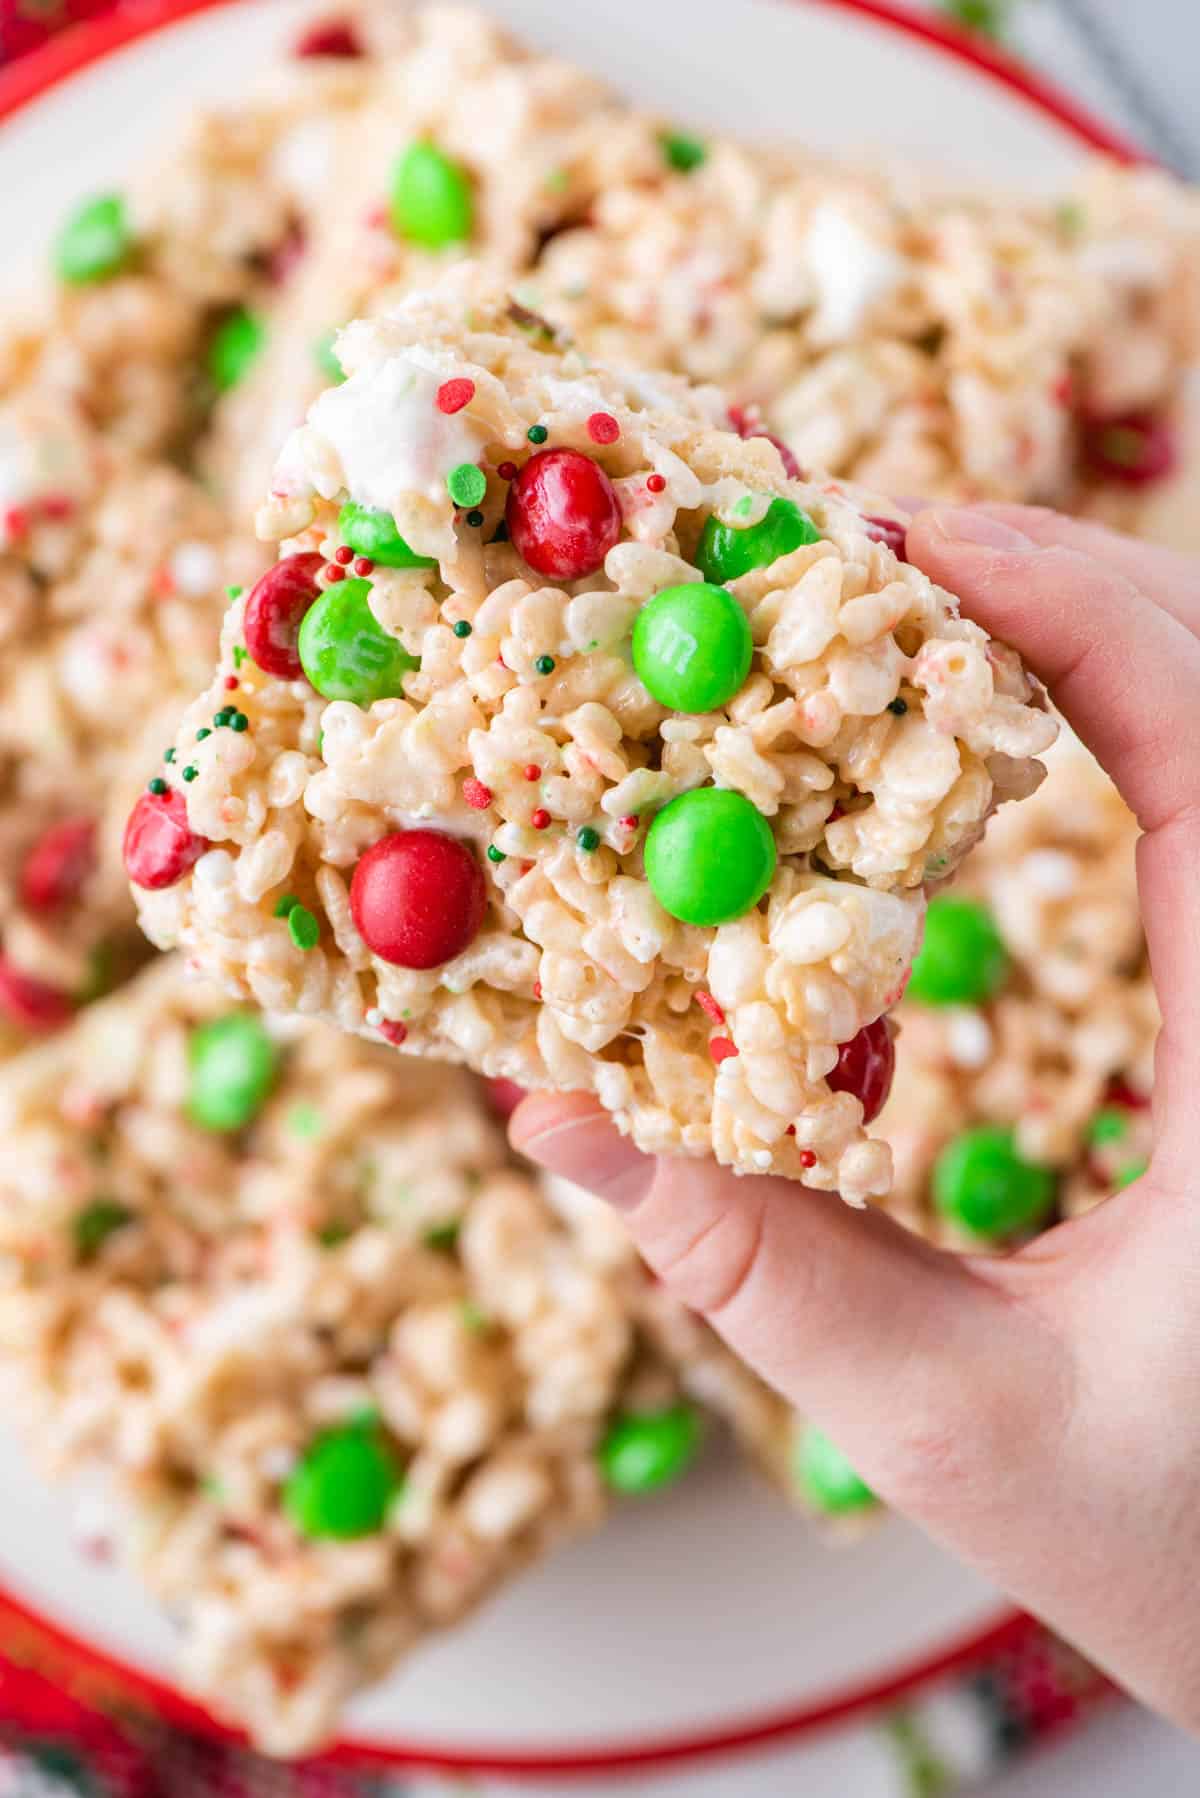 A hand holding a holiday Rice krispie treat